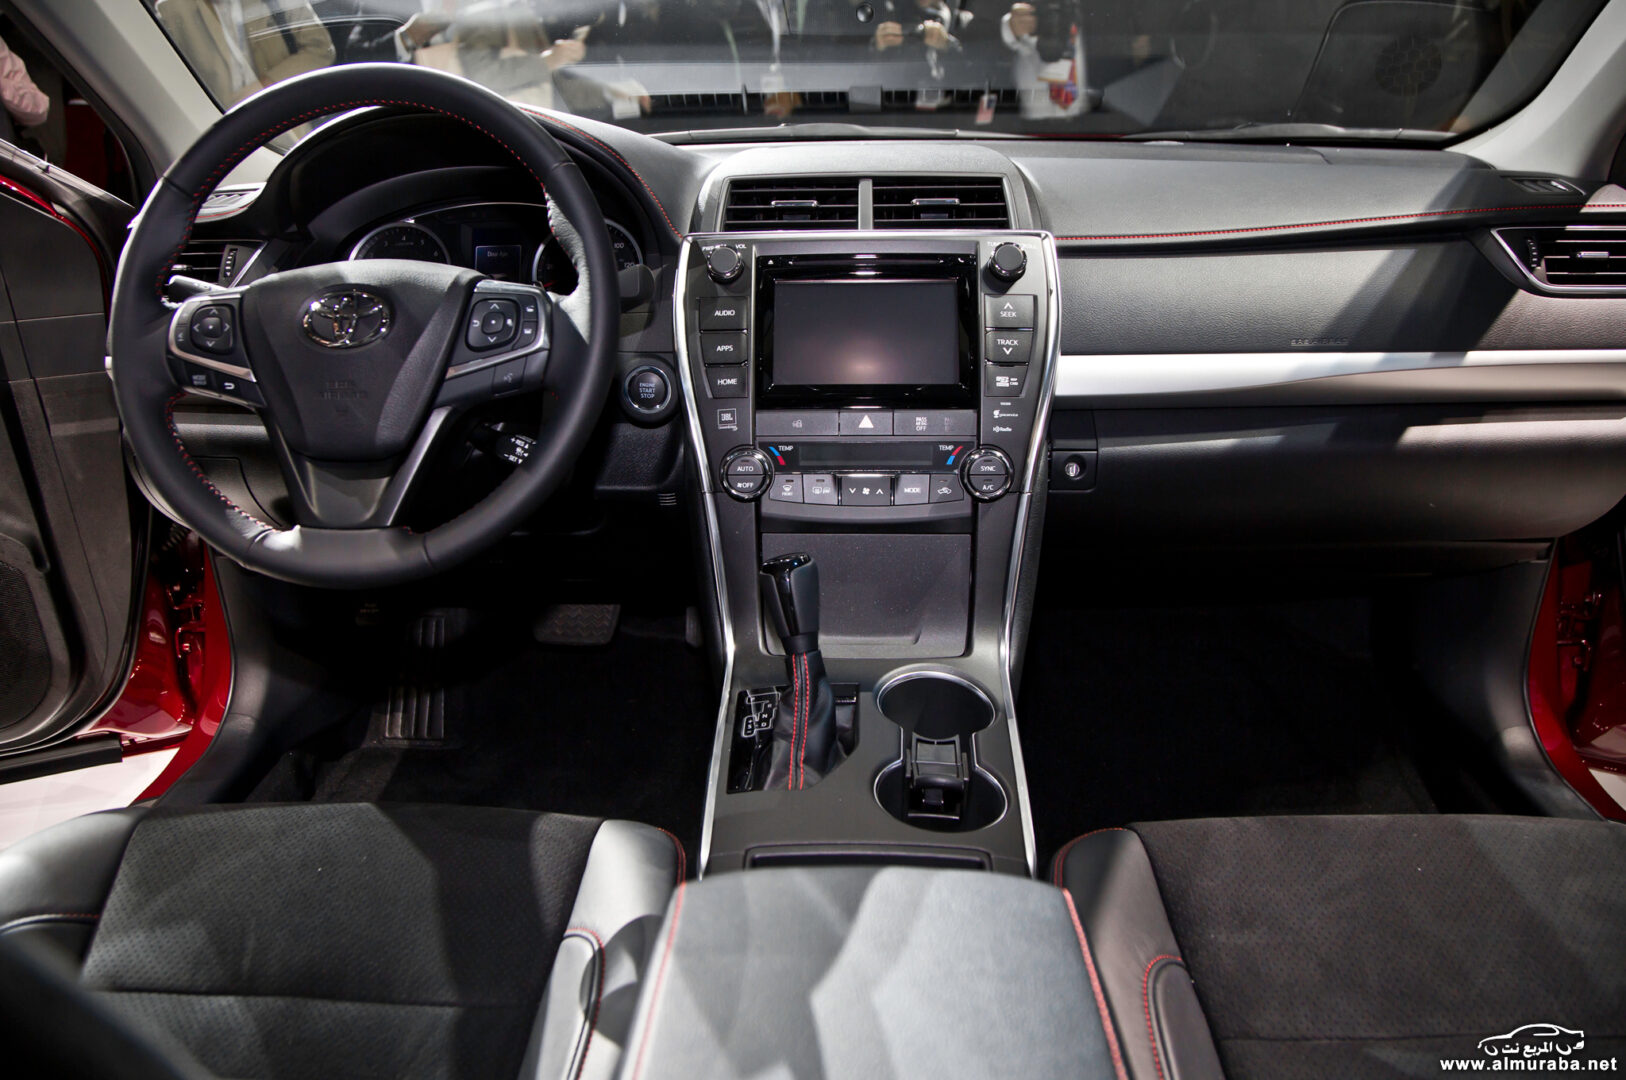 http---image.motortrend.com-f-roadtests-sedans-1404_2015_toyota_camry_first_look-72679077-2015-Toyota-Camry-interior